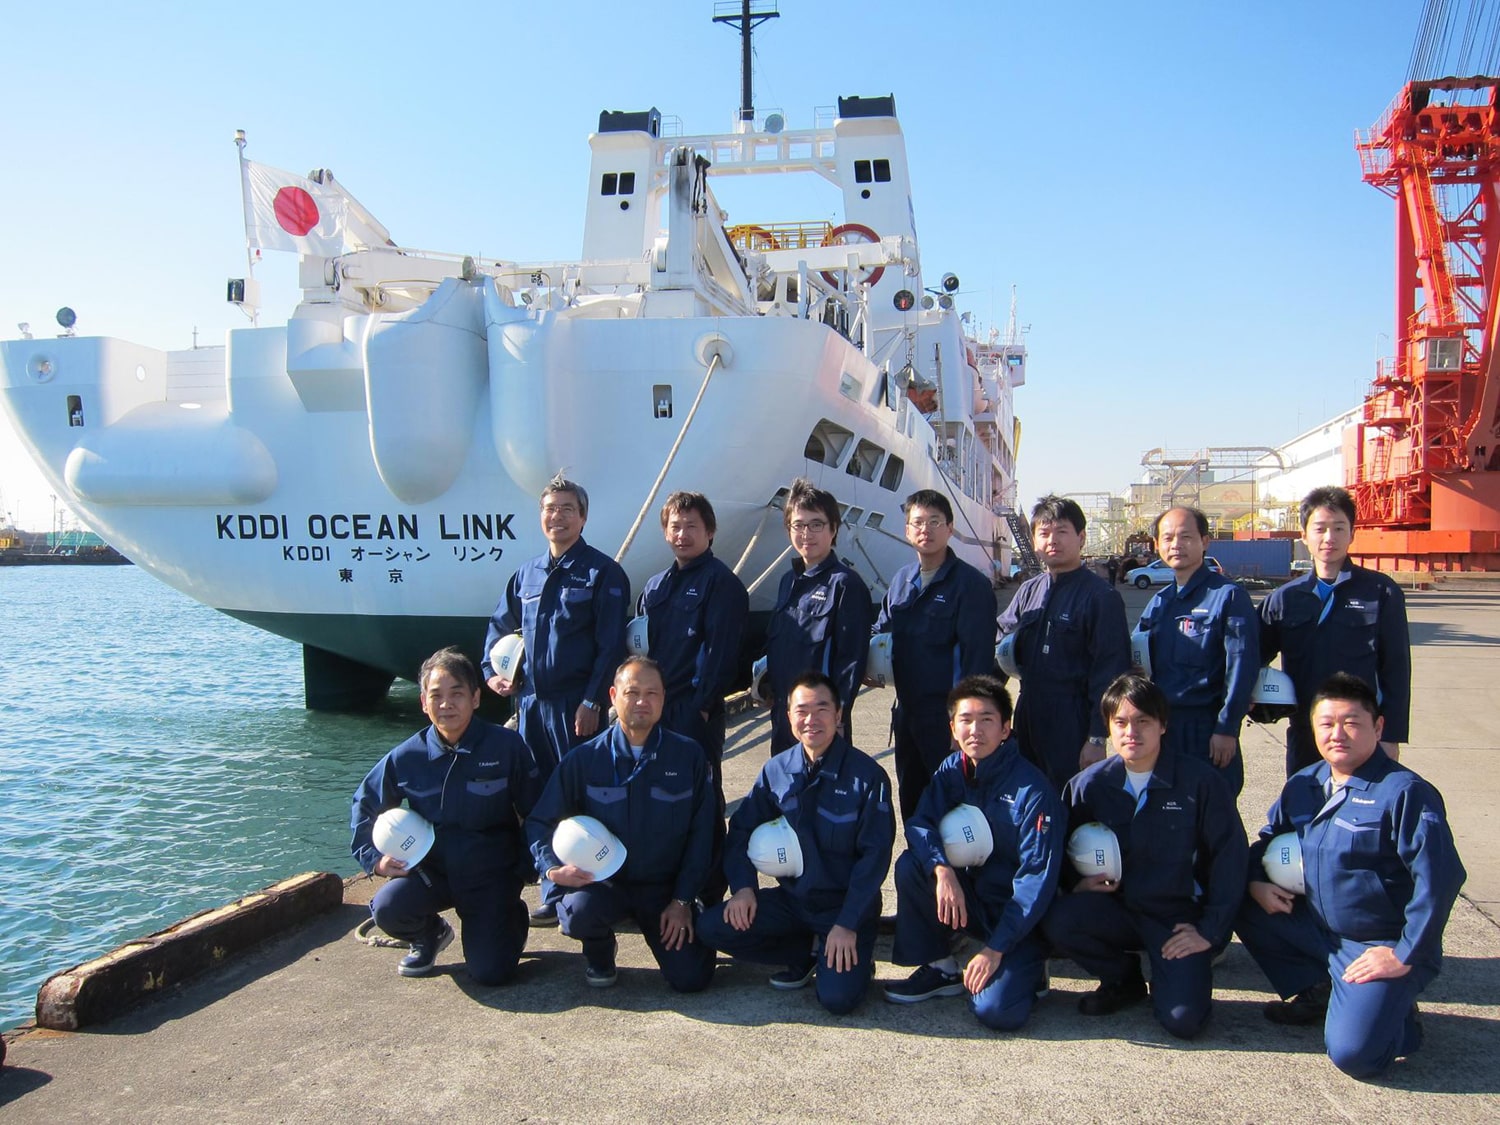 A group photo of the crew of the Ocean Link in 2011. The ship itself is in the background.